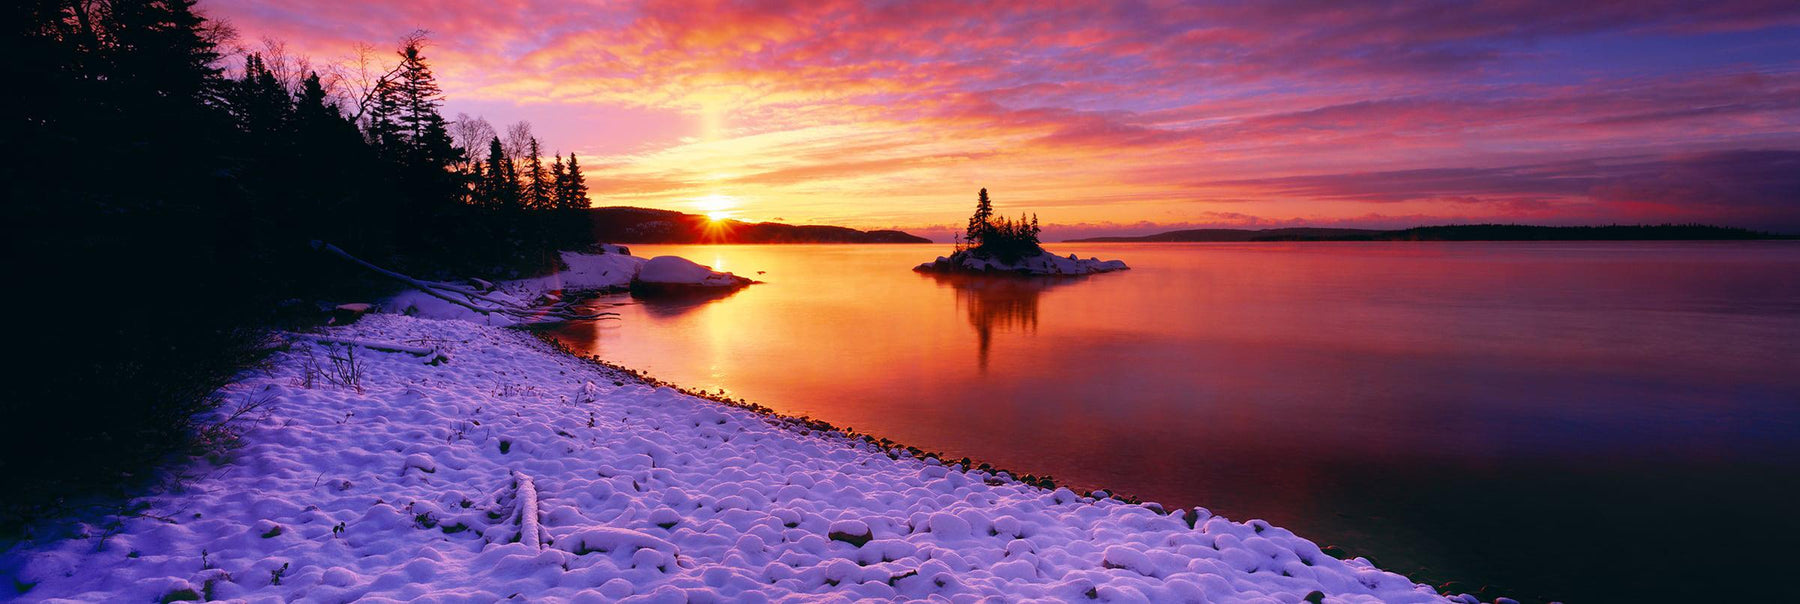 Snow covered beach of Lake Superior Minnesota lined by tree silhouettes at sunrise